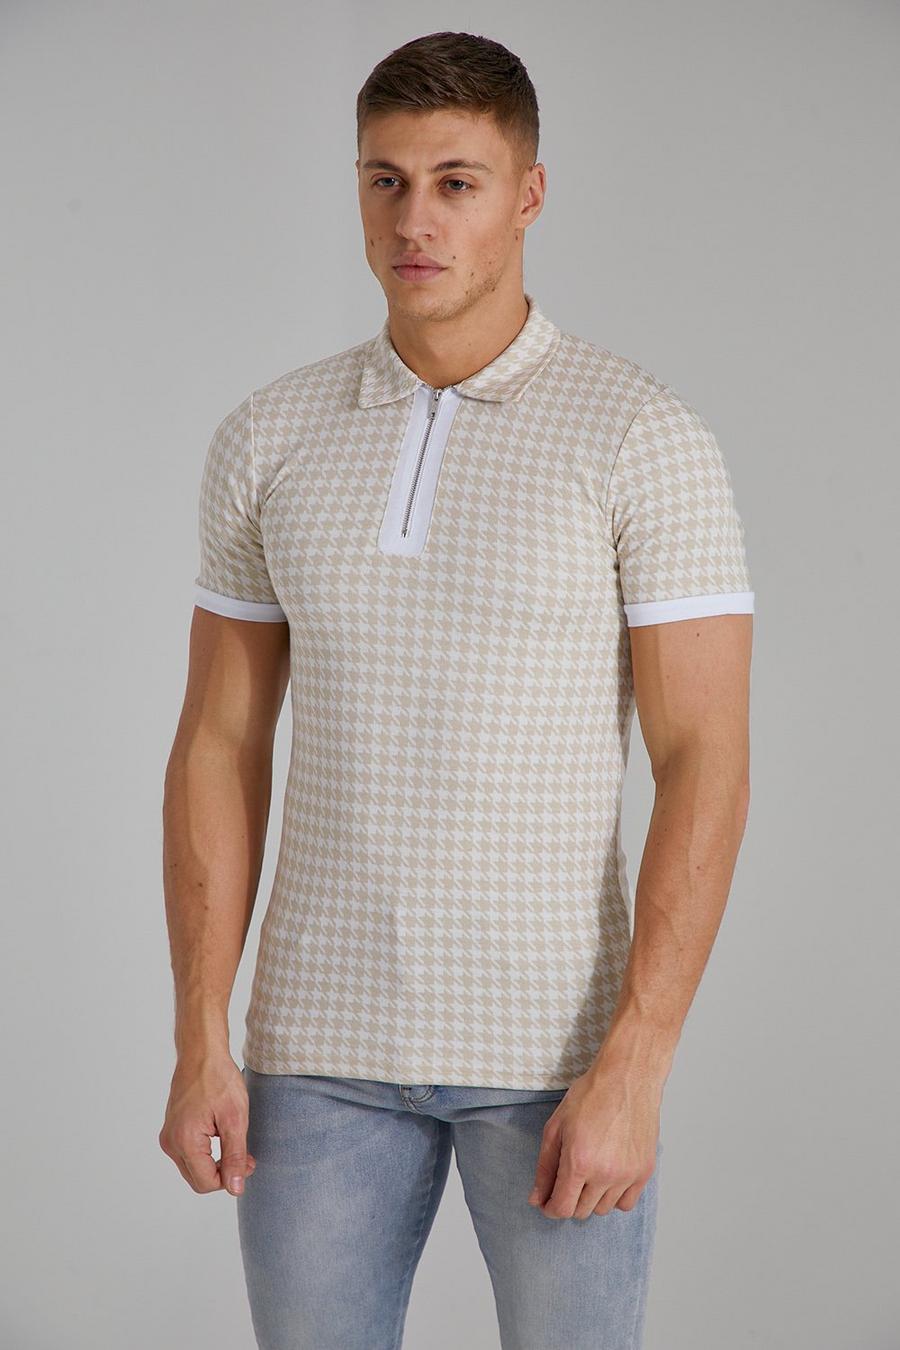 Stone beige Muscle Fit Houndstooth Jacquard Zip Polo